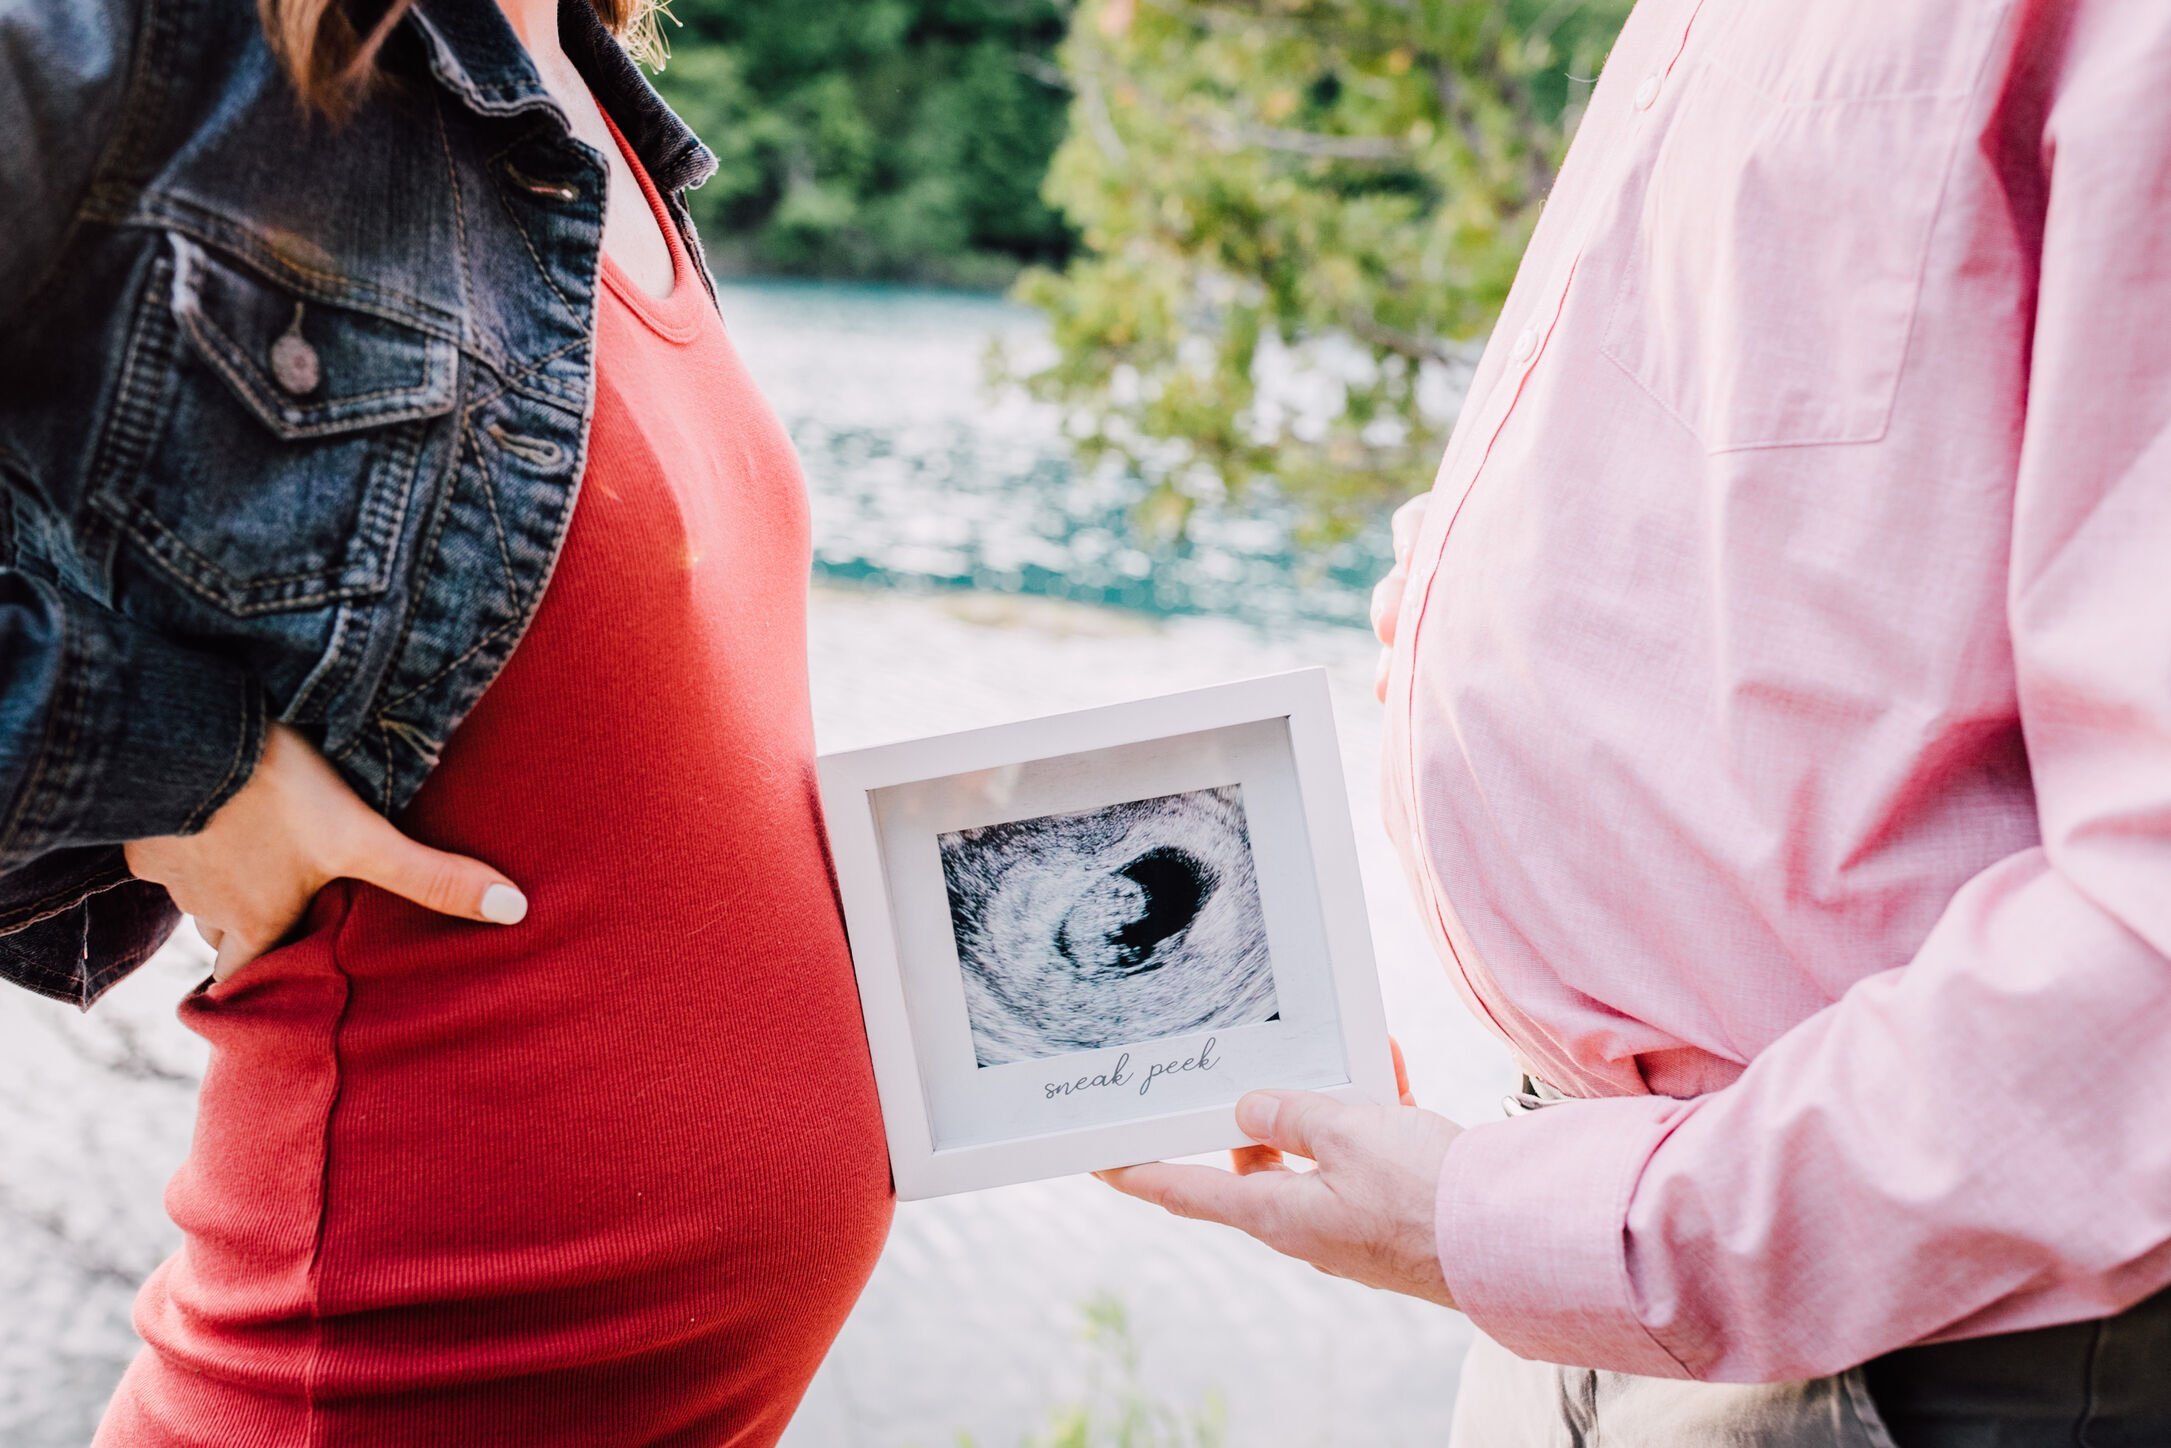  Parents to be show off their bellies next to ultrasound photo for their pregnancy announcement photos 